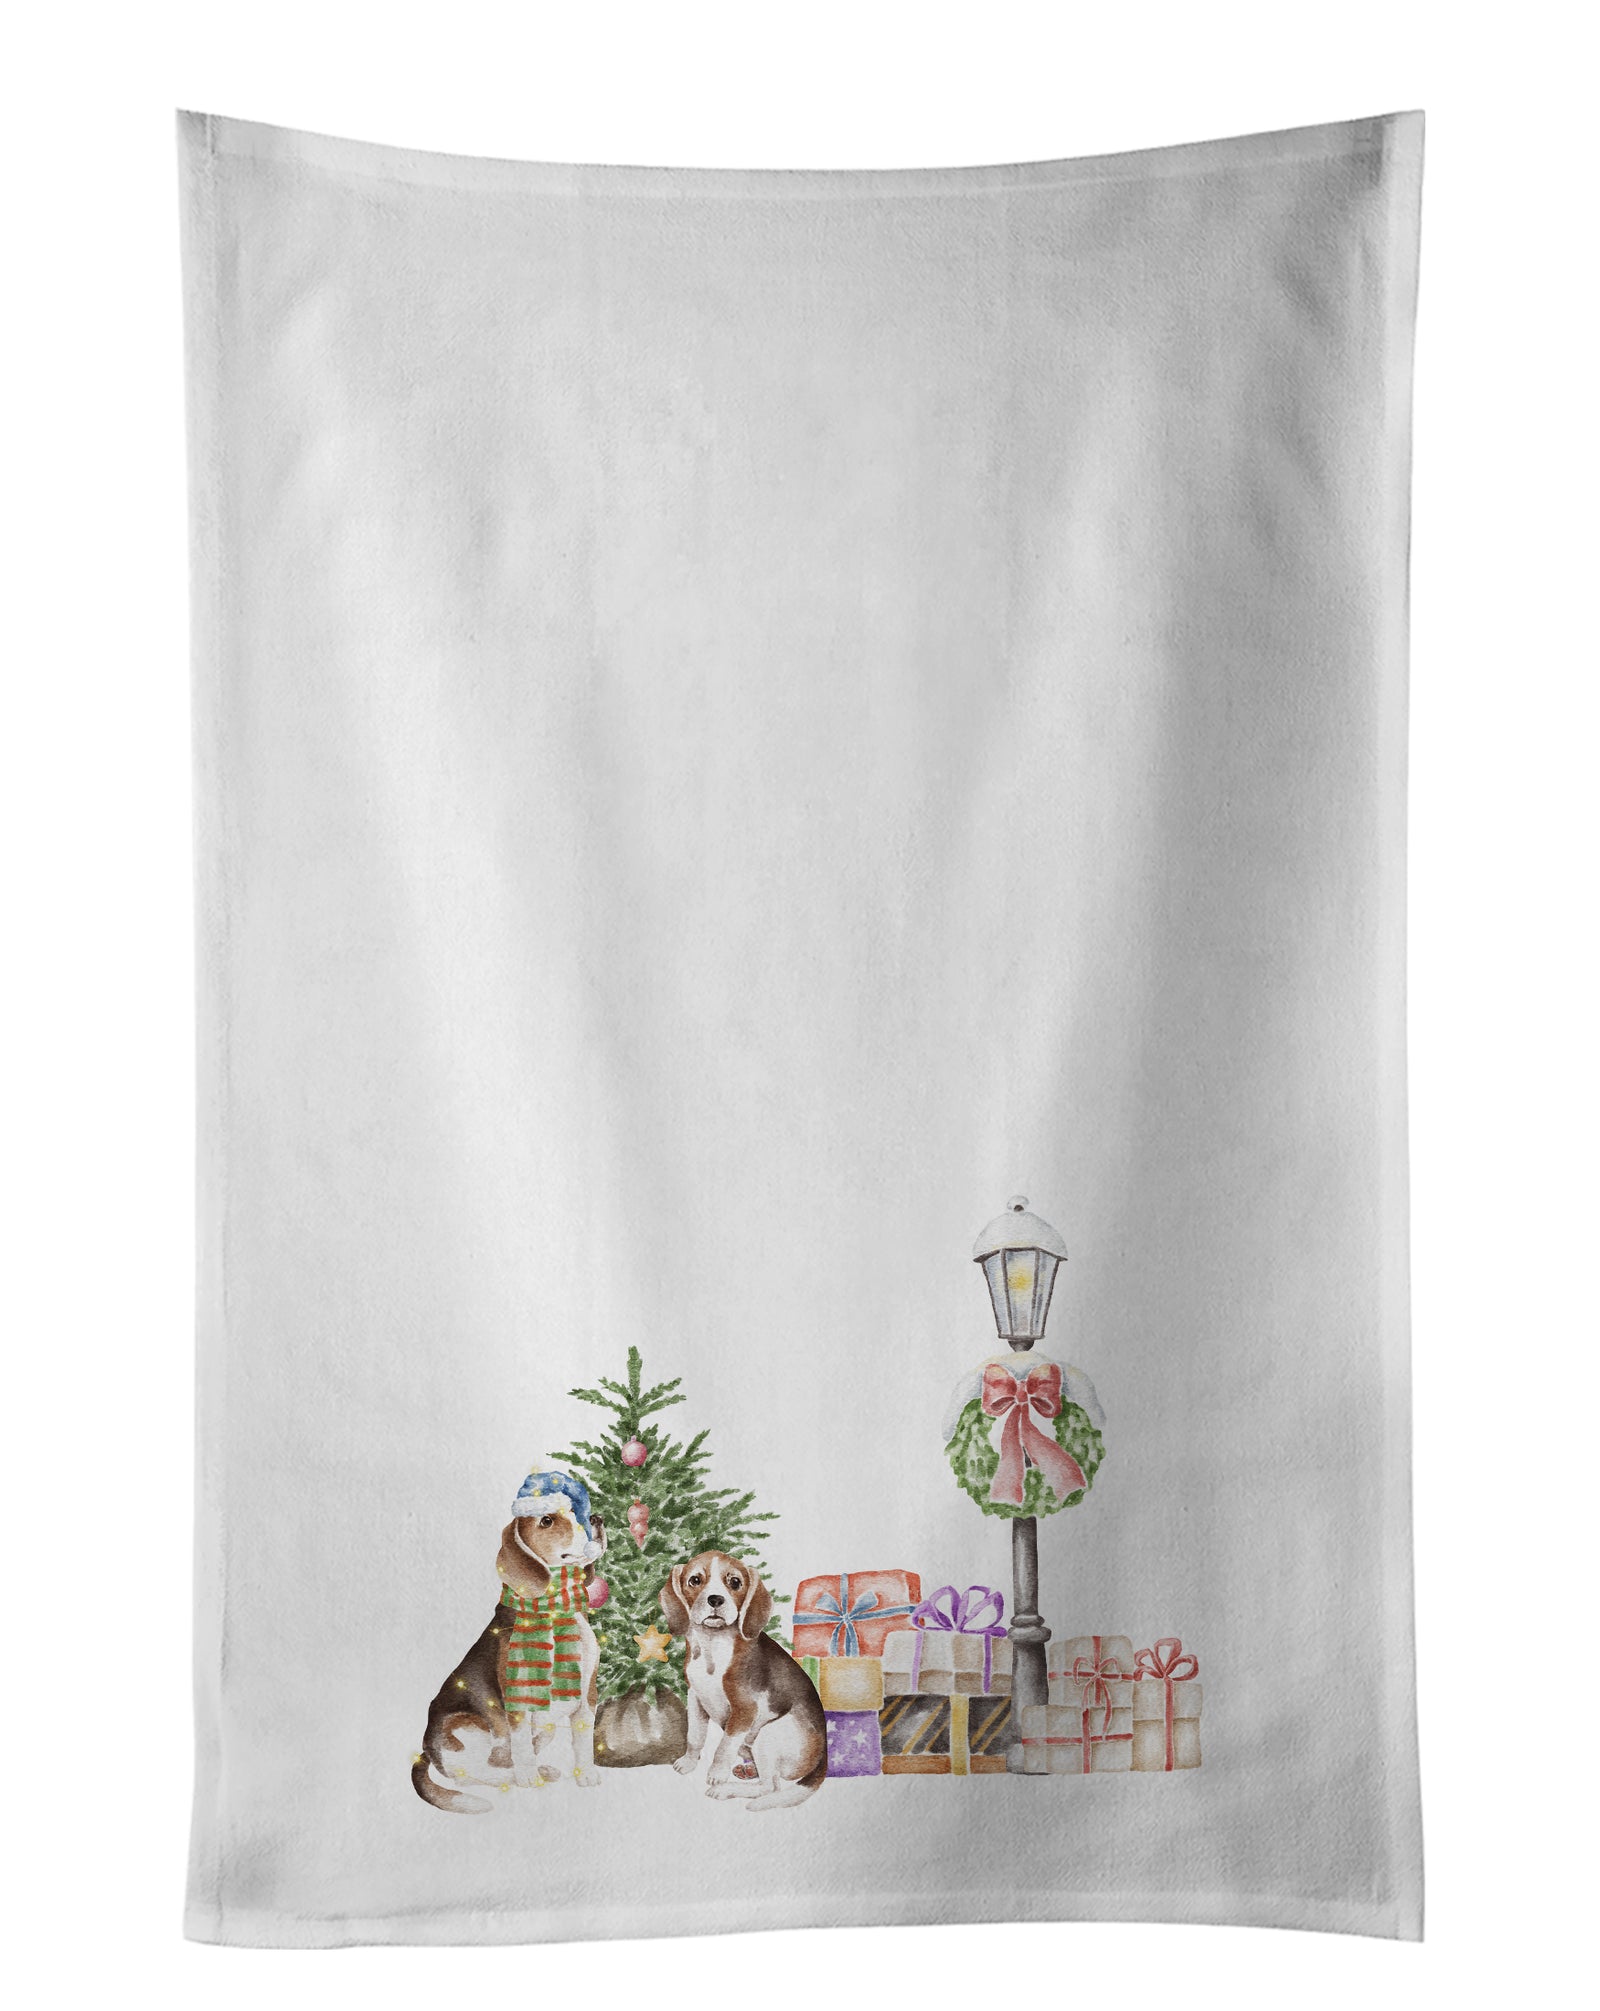 Buy this Beagle Adult and Puppy Tricolor with Christmas Wonderland White Kitchen Towel Set of 2